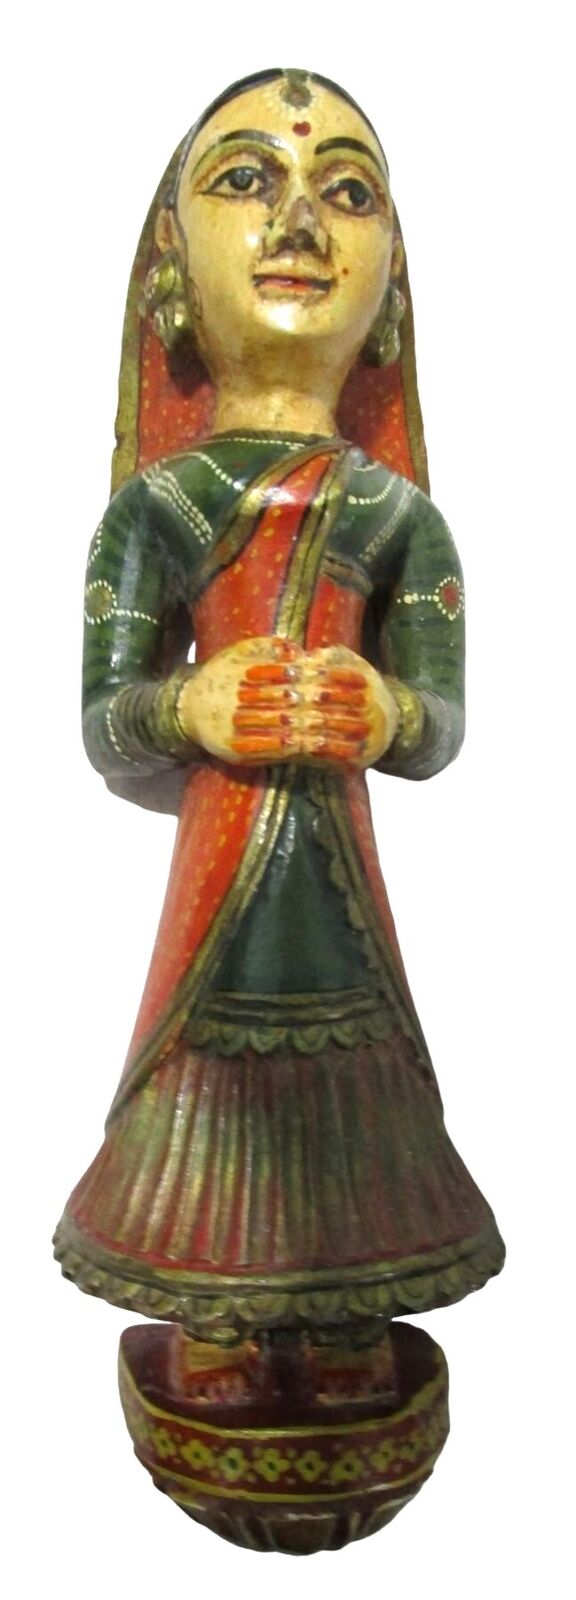 Vintage Painted Carved Wood Indian Woman Fold Hand Traditional Rajasthani Dress